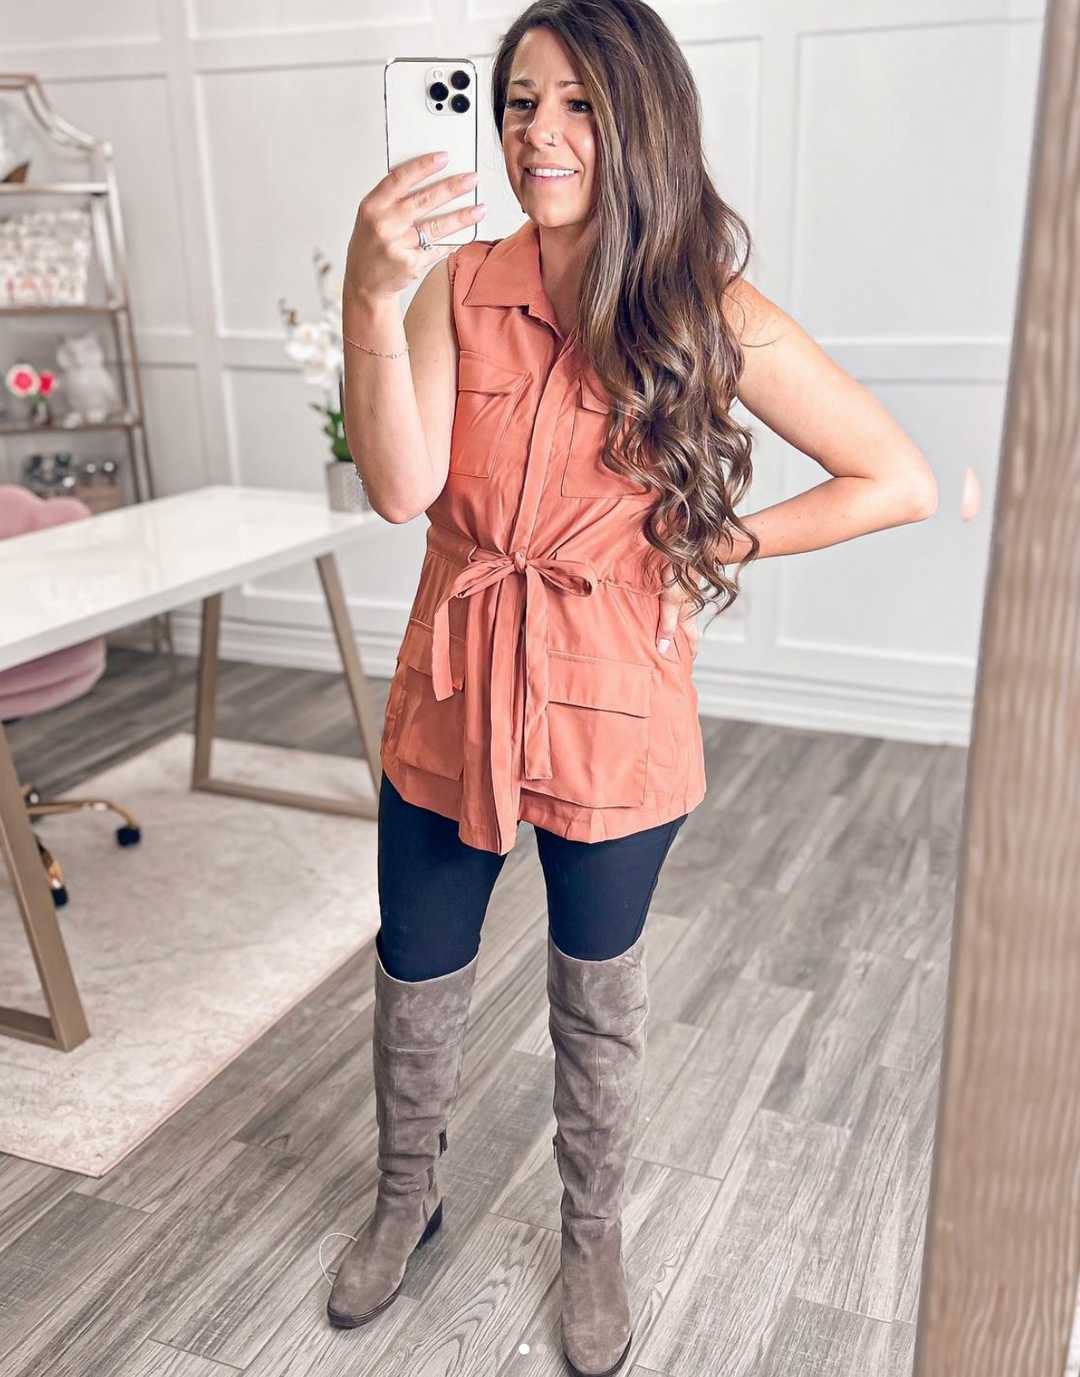 Follow The Light Brick Button Top - Cheeky Chic Boutique